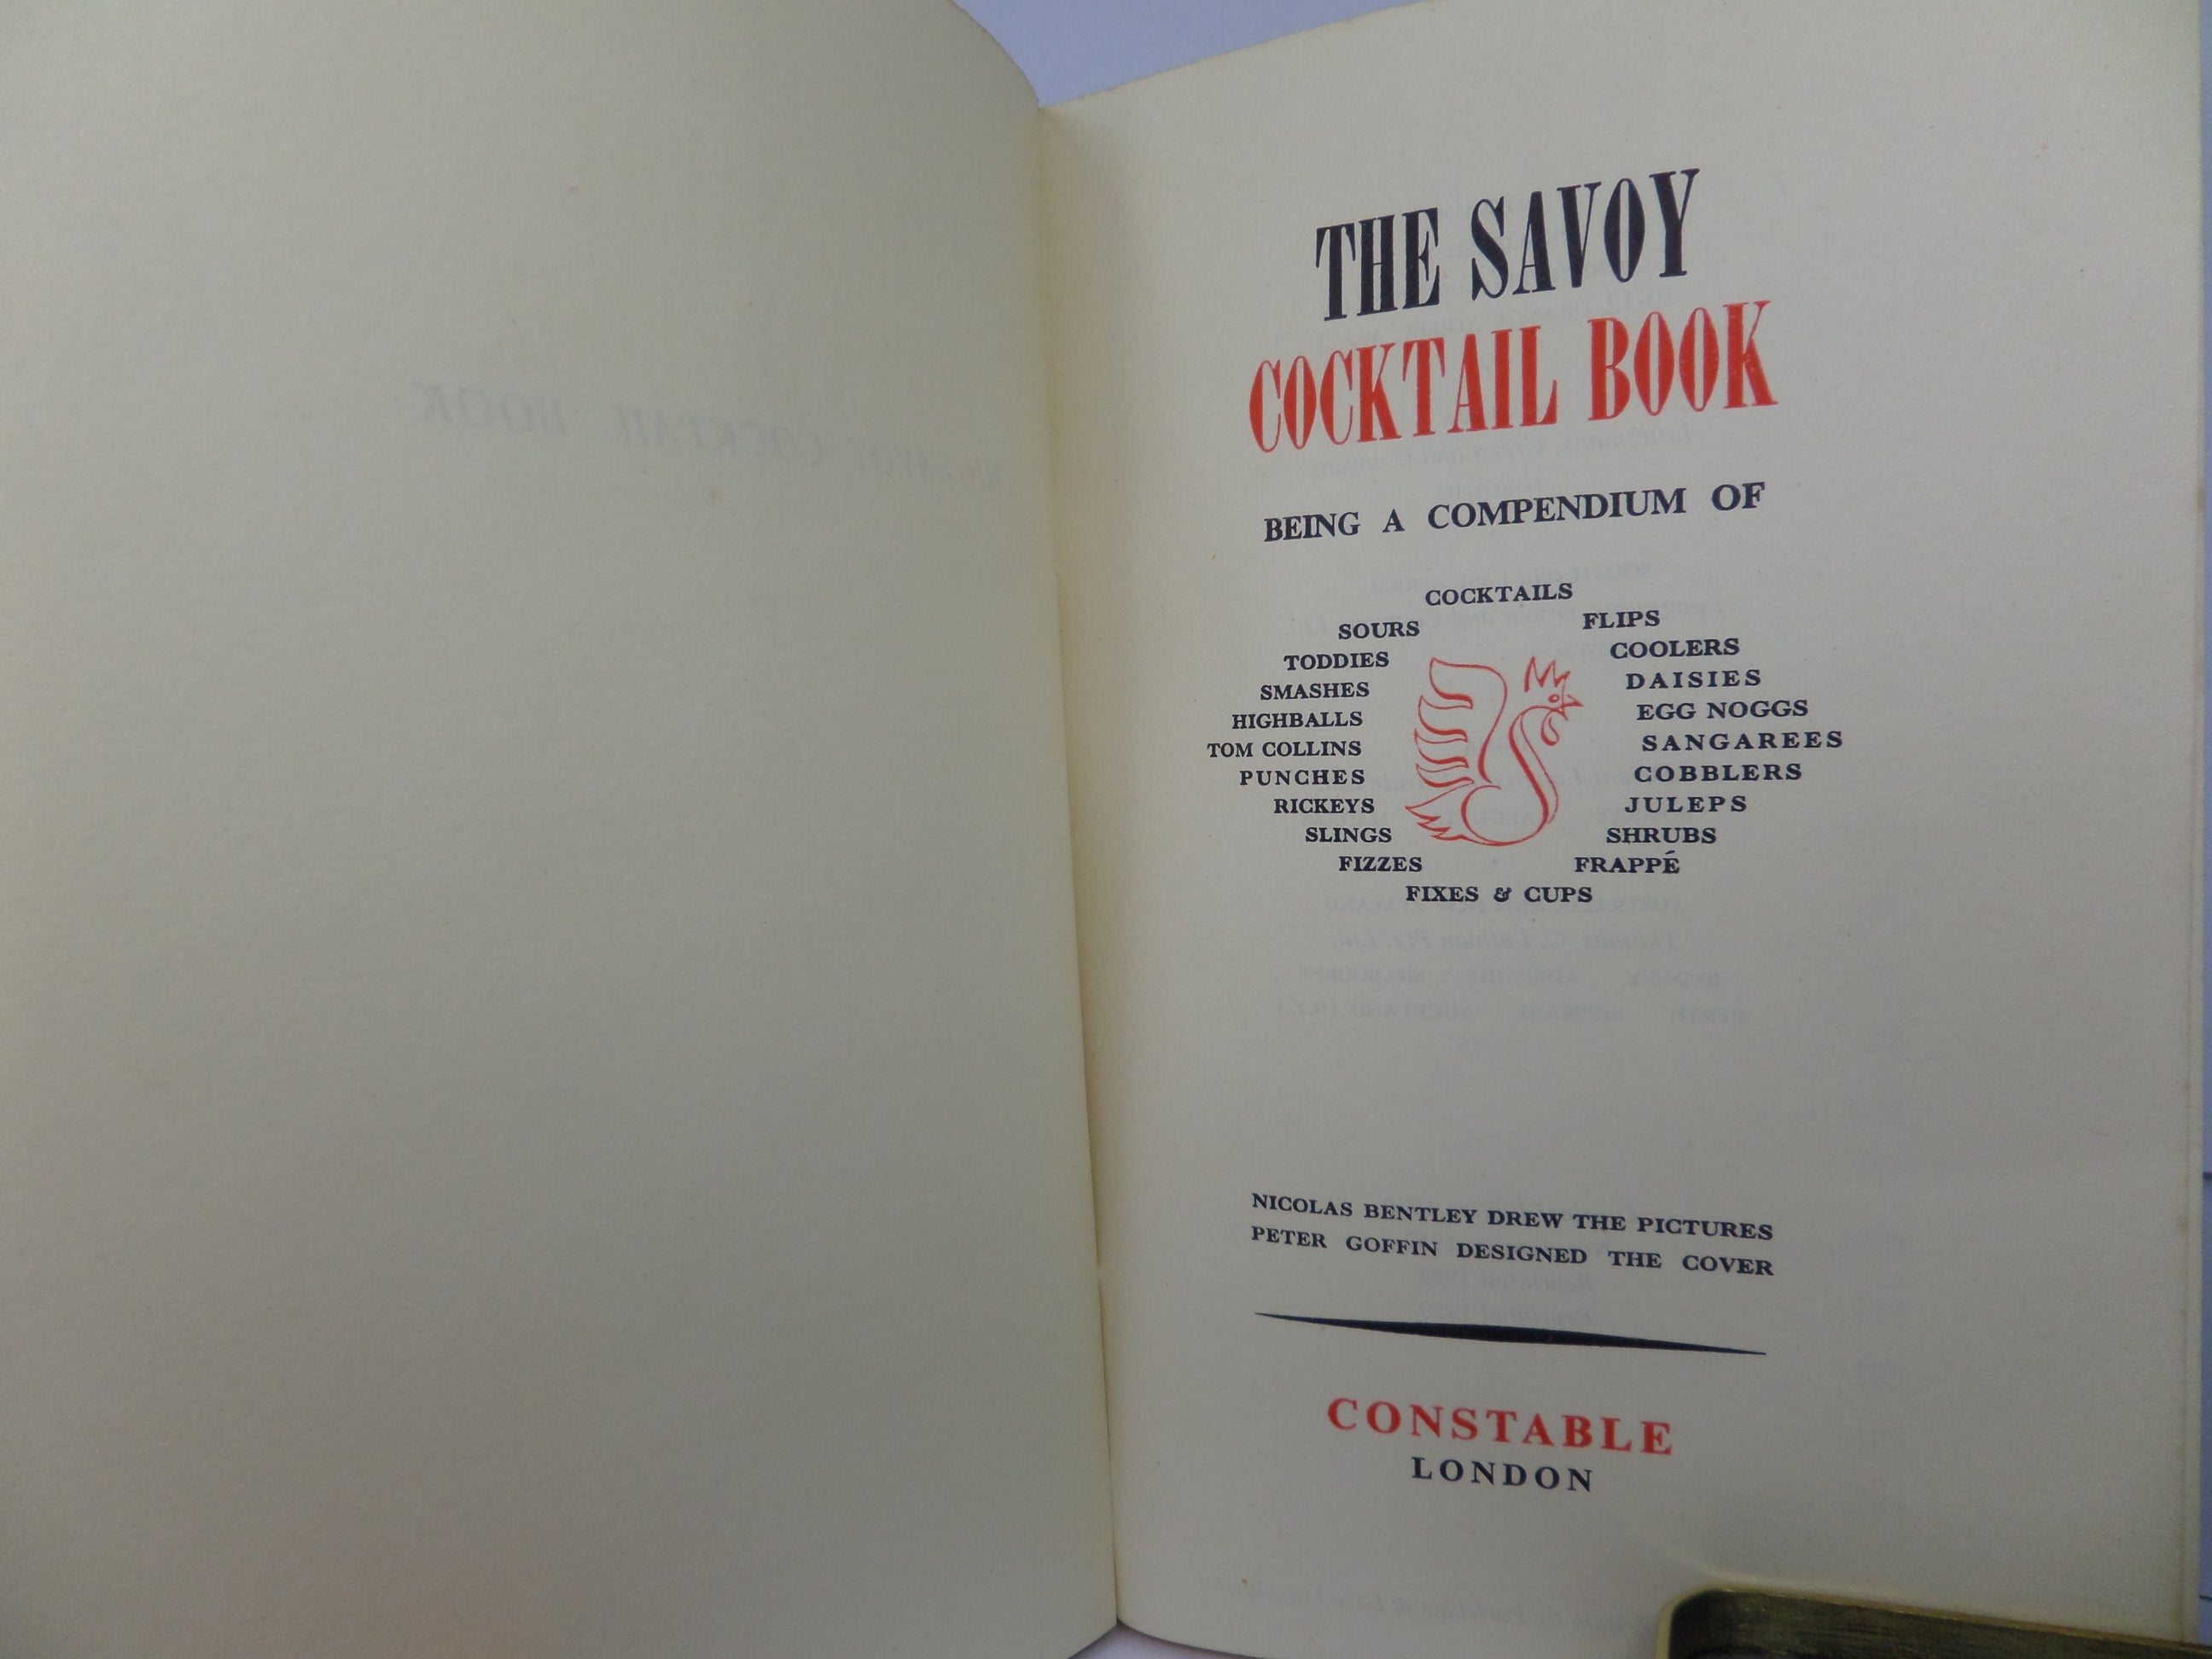 THE SAVOY COCKTAIL BOOK 1959 HARRY CRADDOCK FOURTH EDITION HARDCOVER